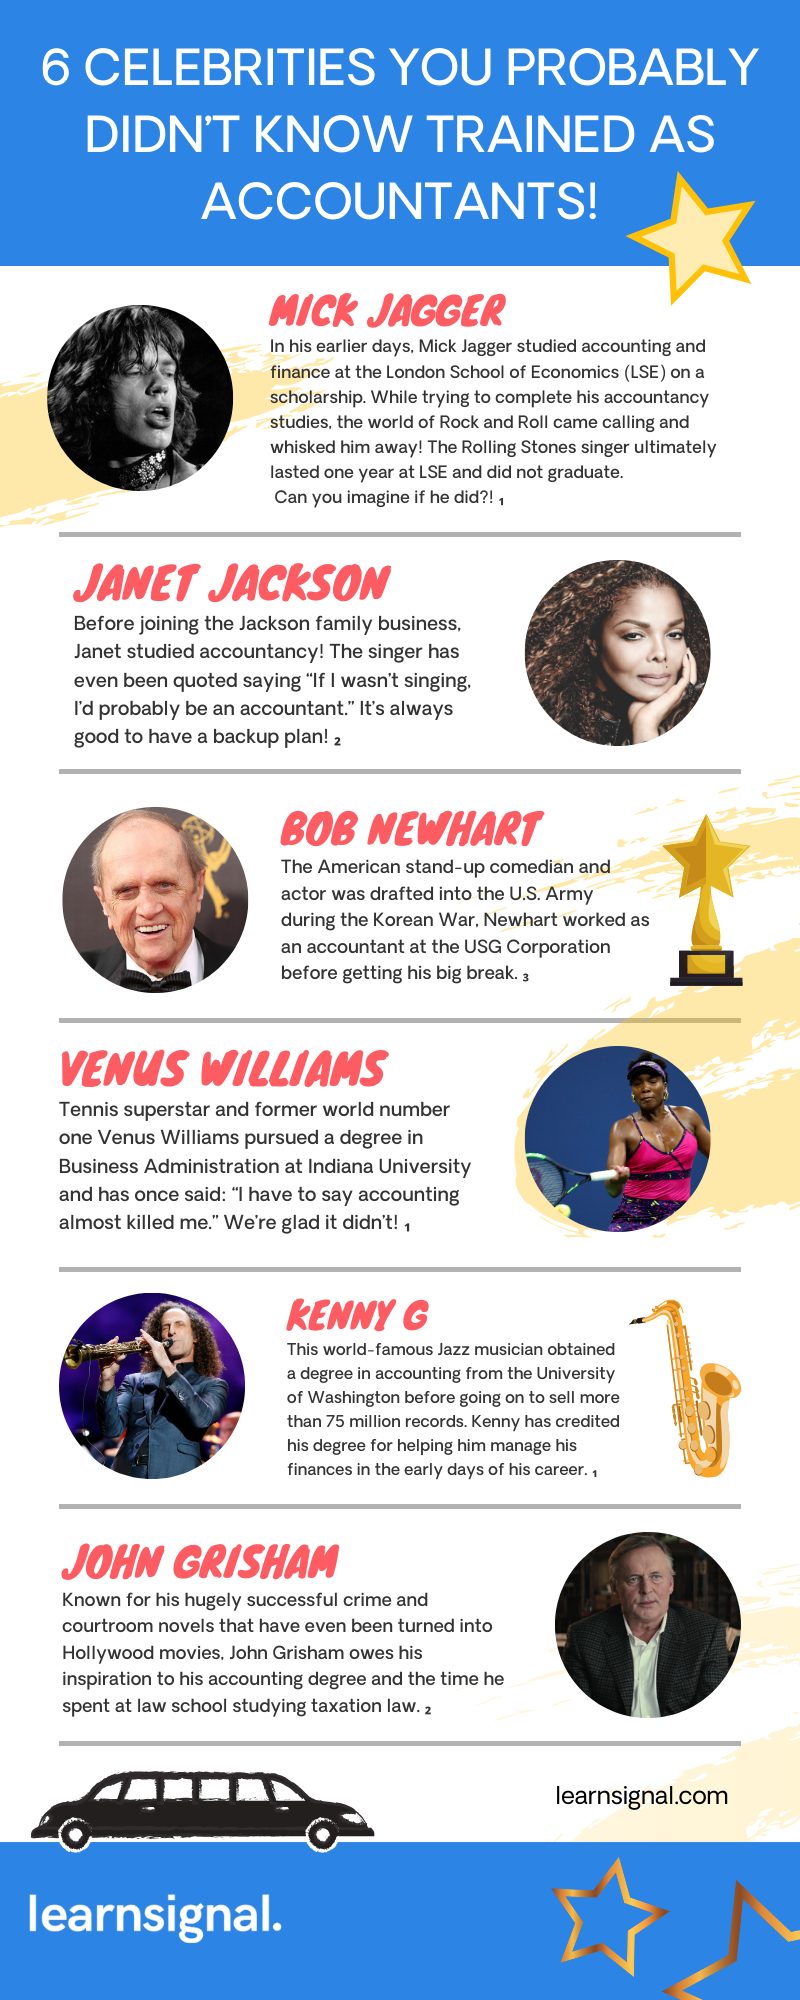 6 Celebrities You Probably Didn’t Know Trained As Accountants Infographic